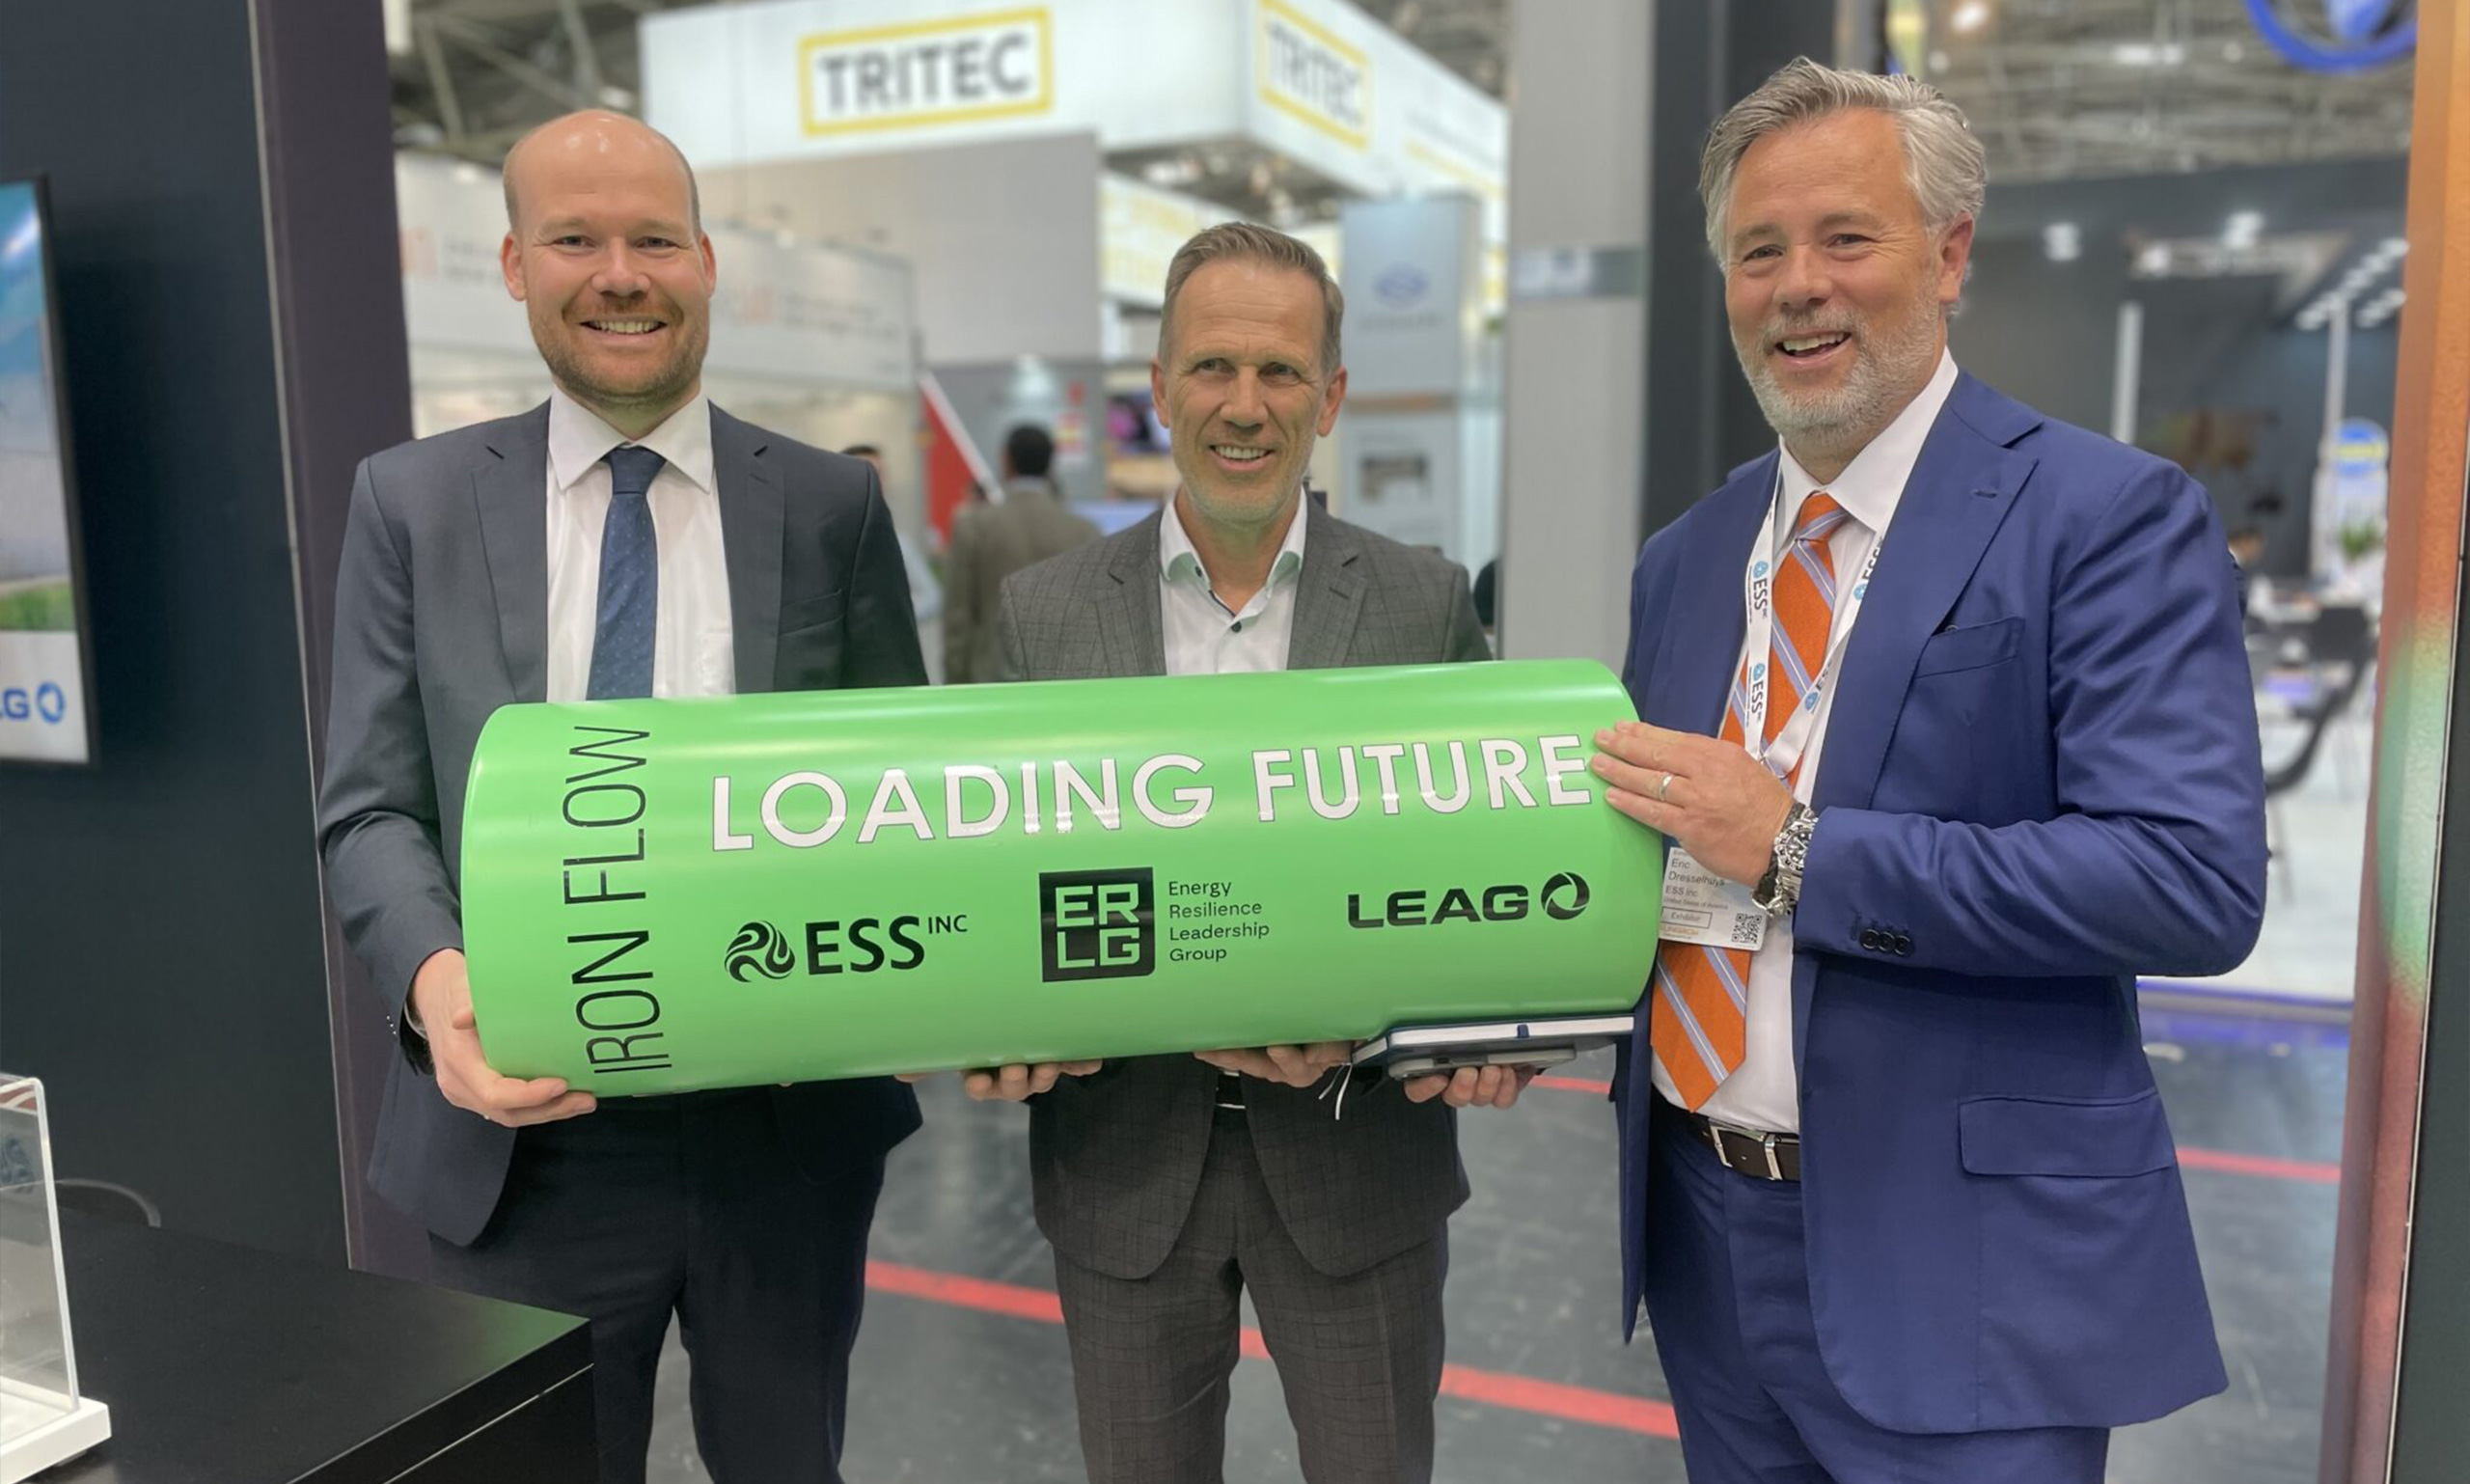 Philipp Offenberg (Breakthrough Energy), Eric Dresselhuys (ESS) and Thorsten Kramer (LEAG) in a group picture holding up a symbolic battery for their iron flow technology for long-duration storage of electricity.